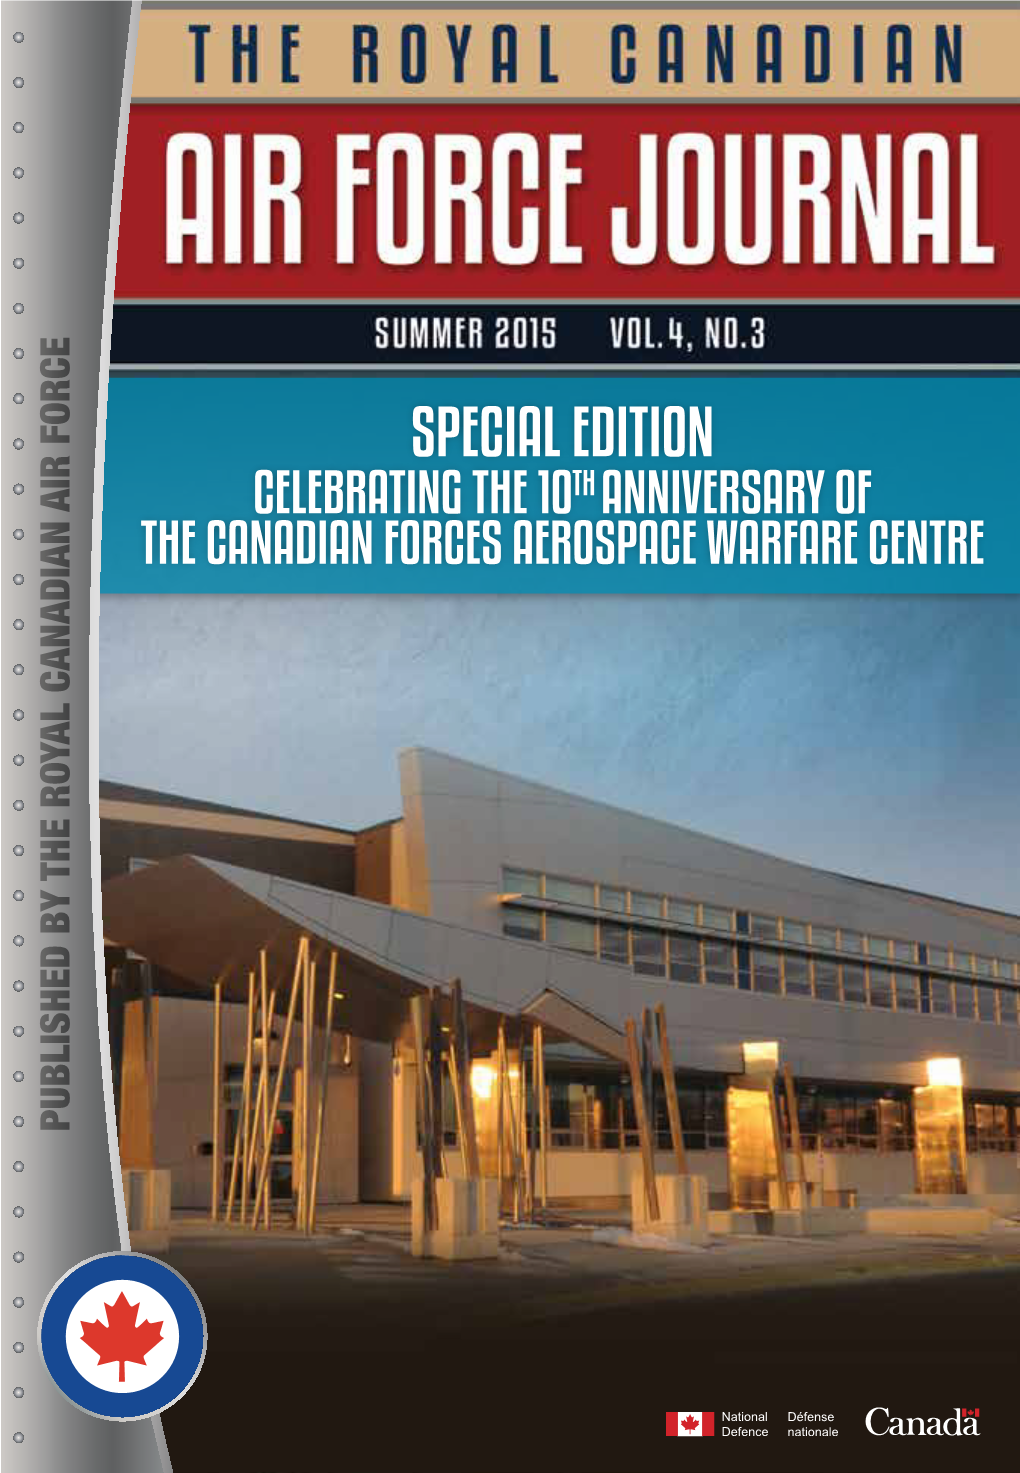 THE ROYAL CANADIAN AIR FORCE JOURNAL Is an Official Publication of the Commander Royal Canadian Air Force (RCAF) and Is Published Quarterly